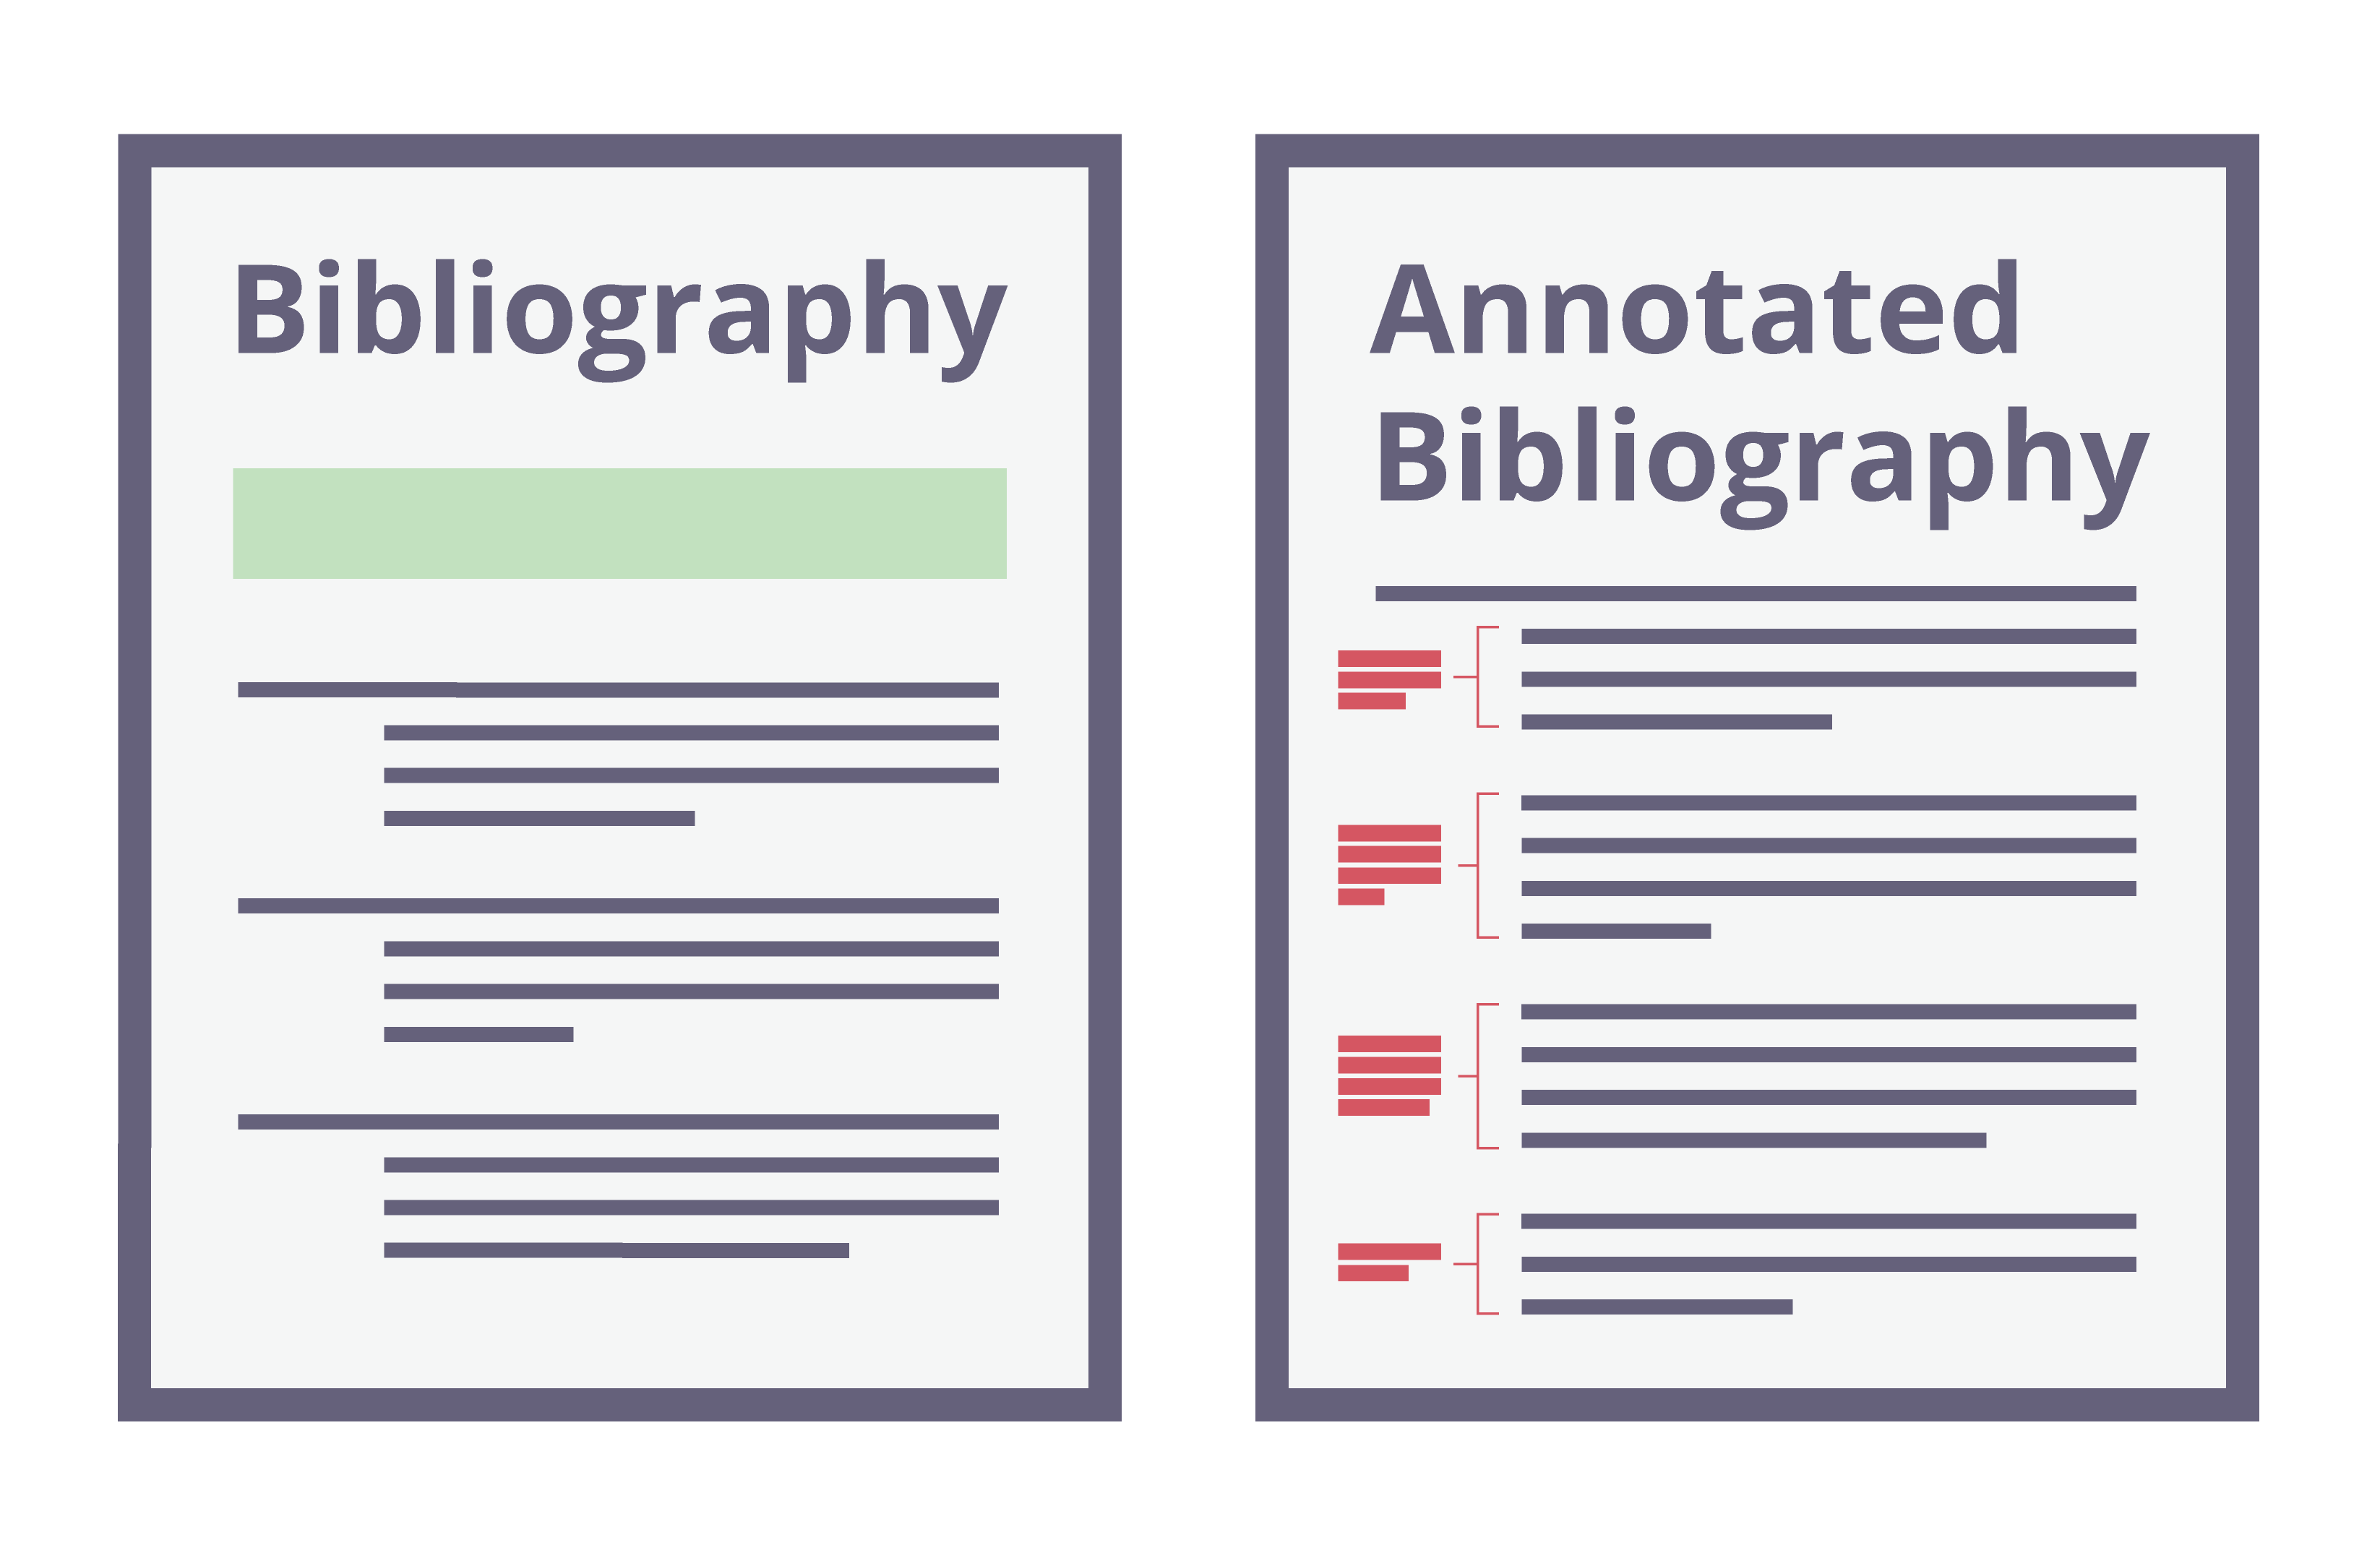 Two assignments side by side. On the left is a Bibliography with lines representing works cited. On the right is an Annotated bibliography with the same lines representing works cited, plus additional red lines to represent annotations.